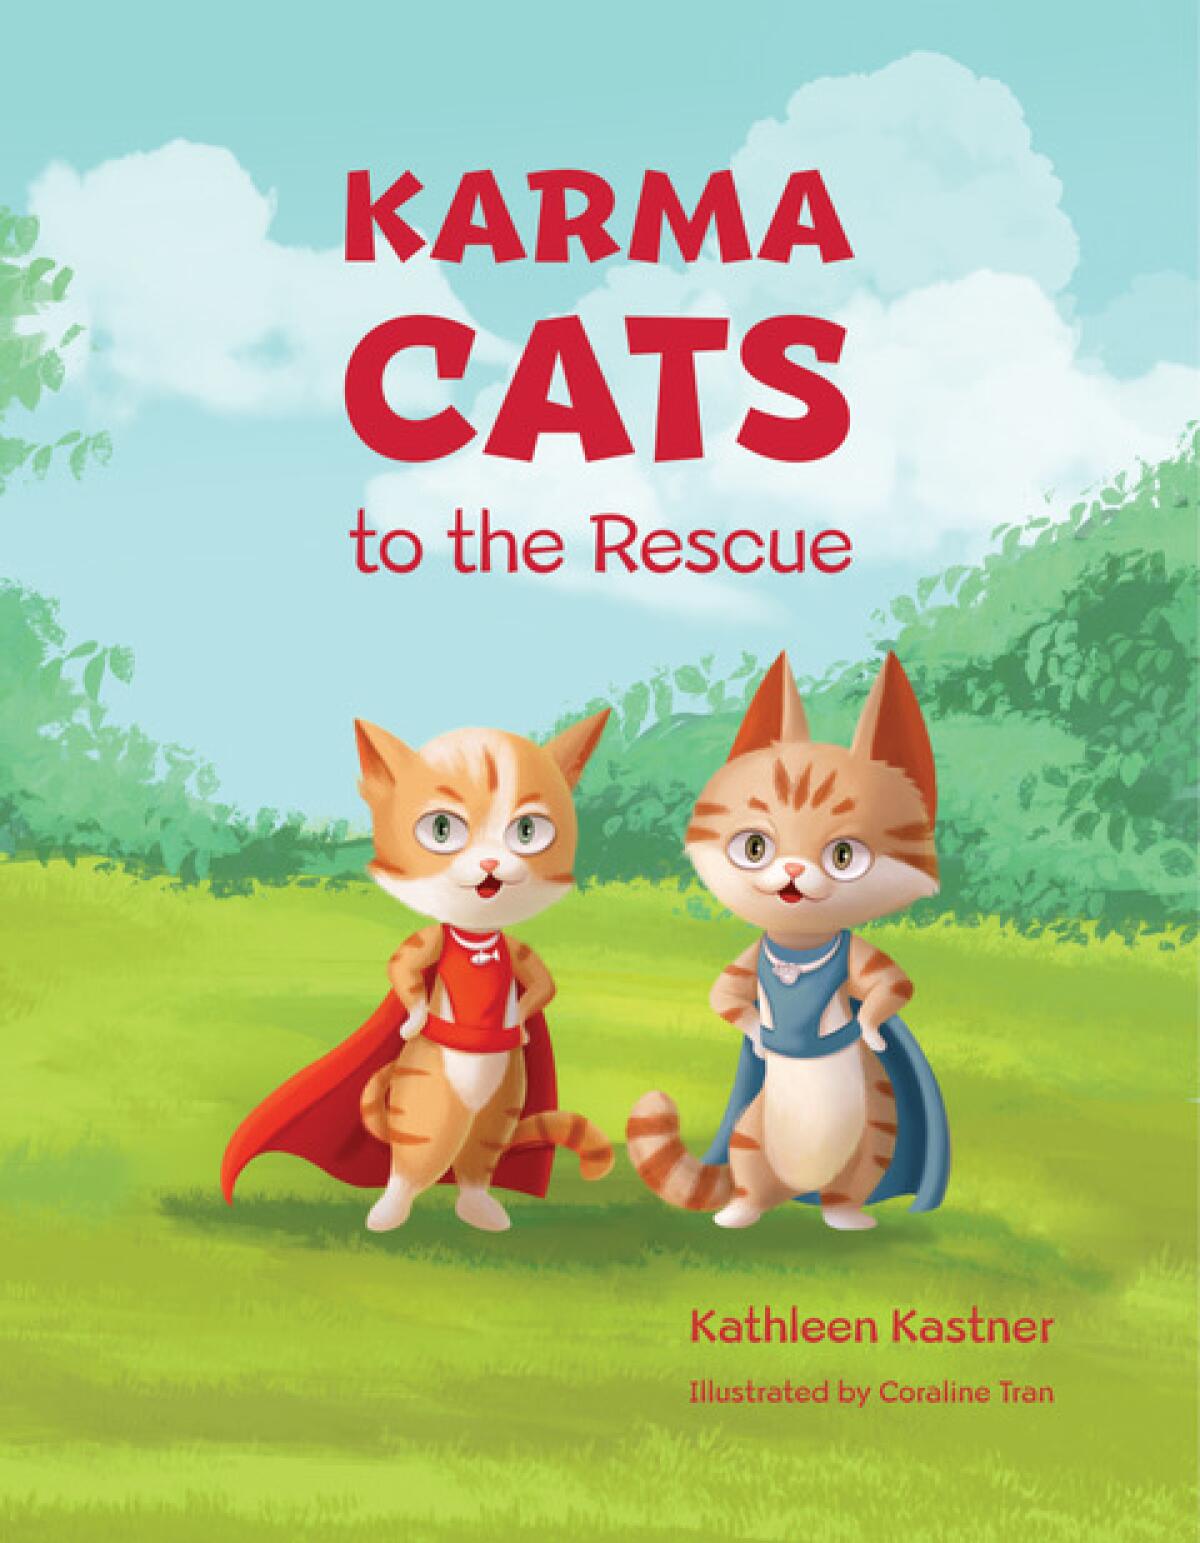 “Karma Cats to the Rescue” by Kathleen Kastner. Illustrations by Coraline Tran.